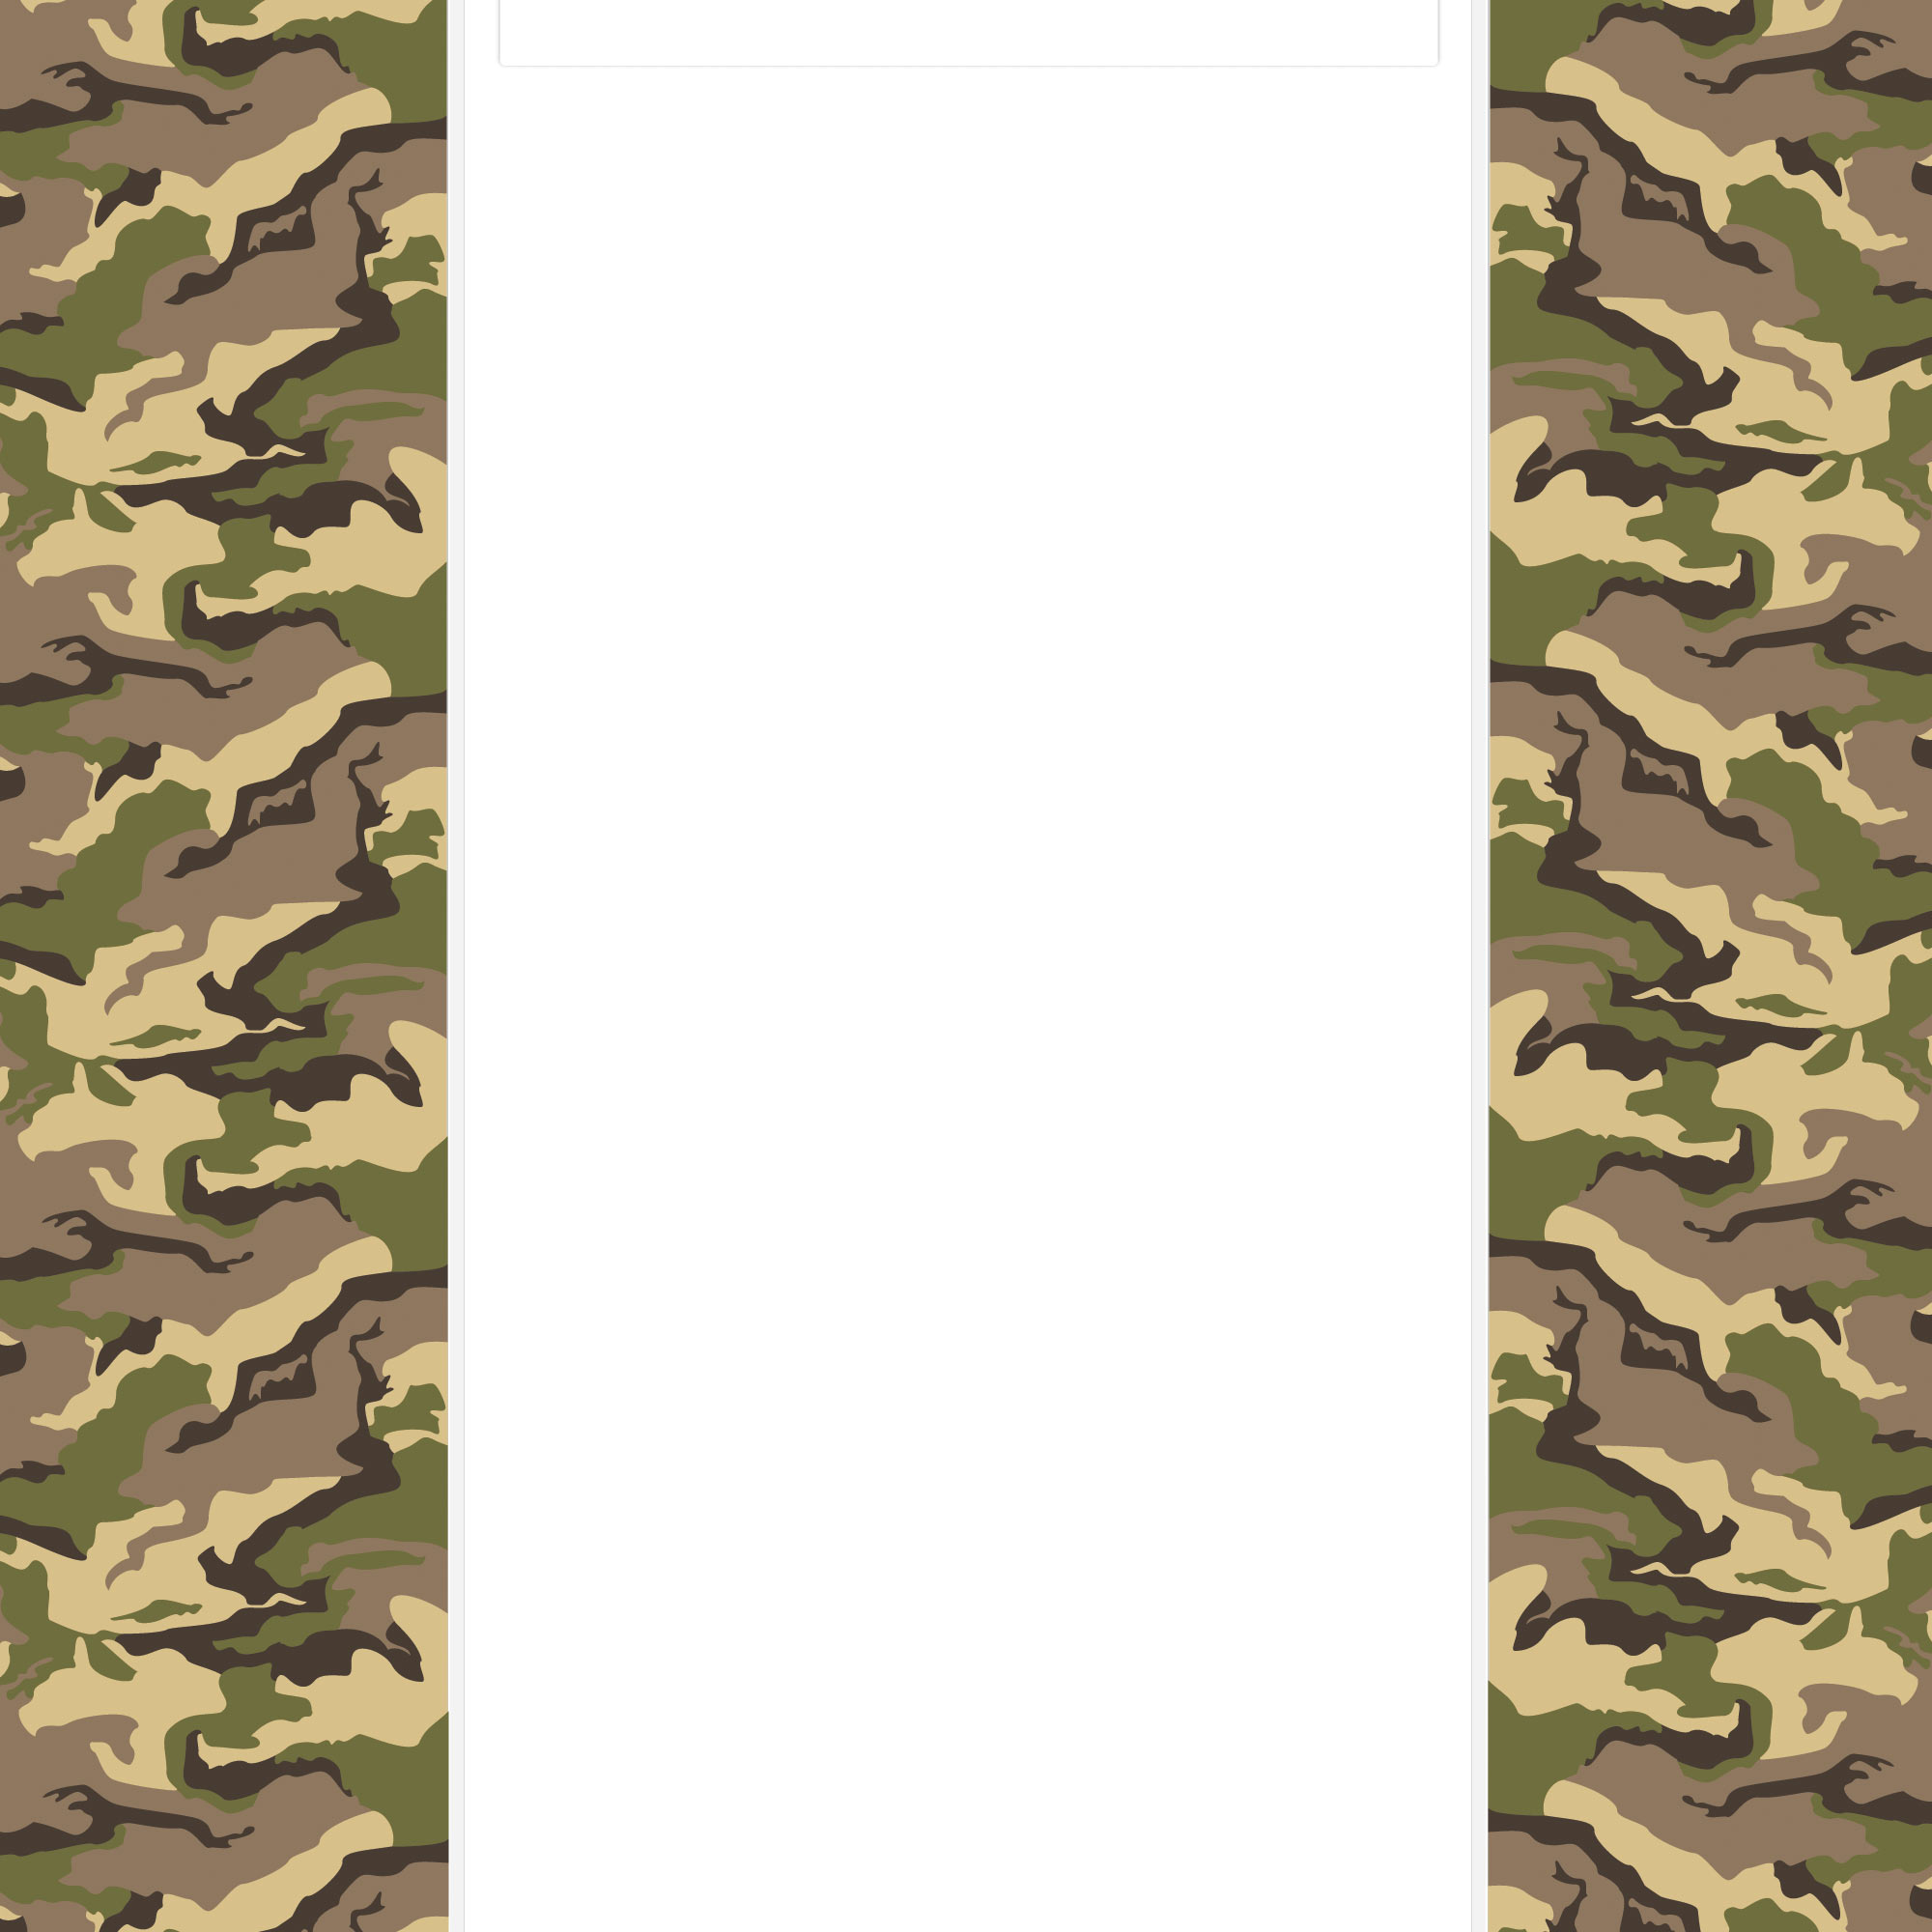 camo wallpaper border,military camouflage,green,pattern,camouflage,uniform